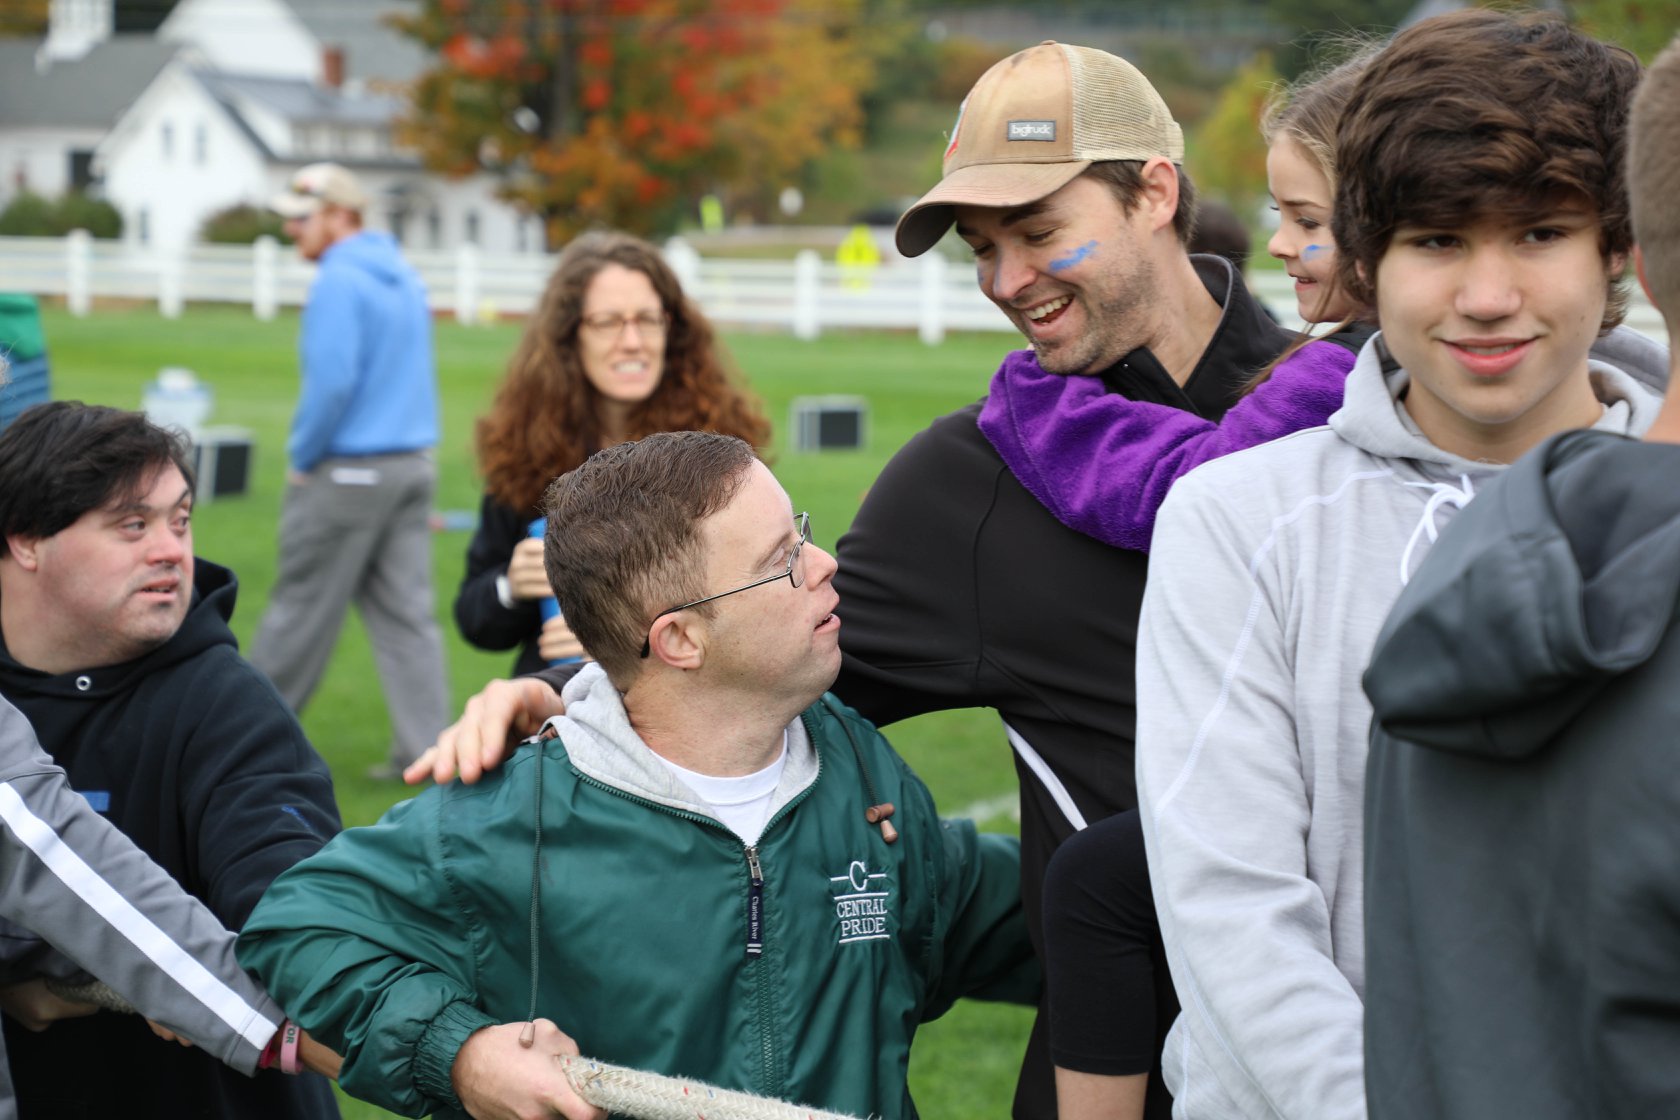 Proctor Academy Special Olympics